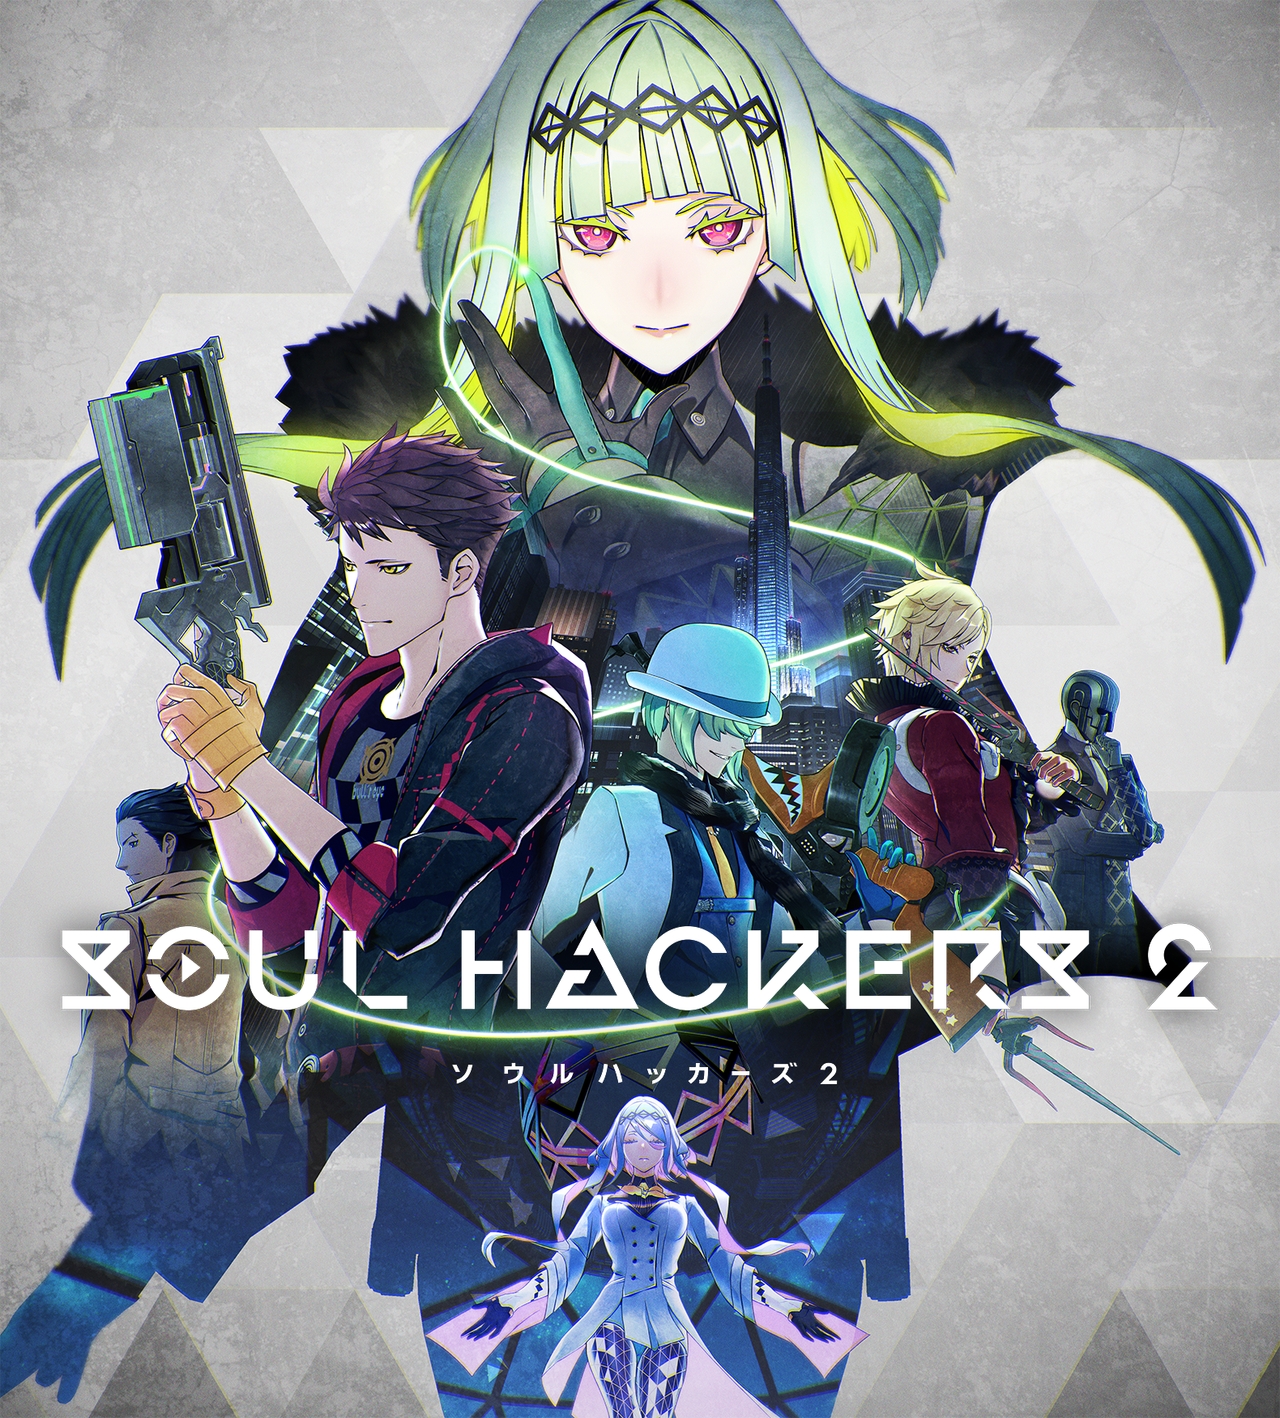 New screenshots for Soul Hackers 2 detail story, characters, demons, combat, and more